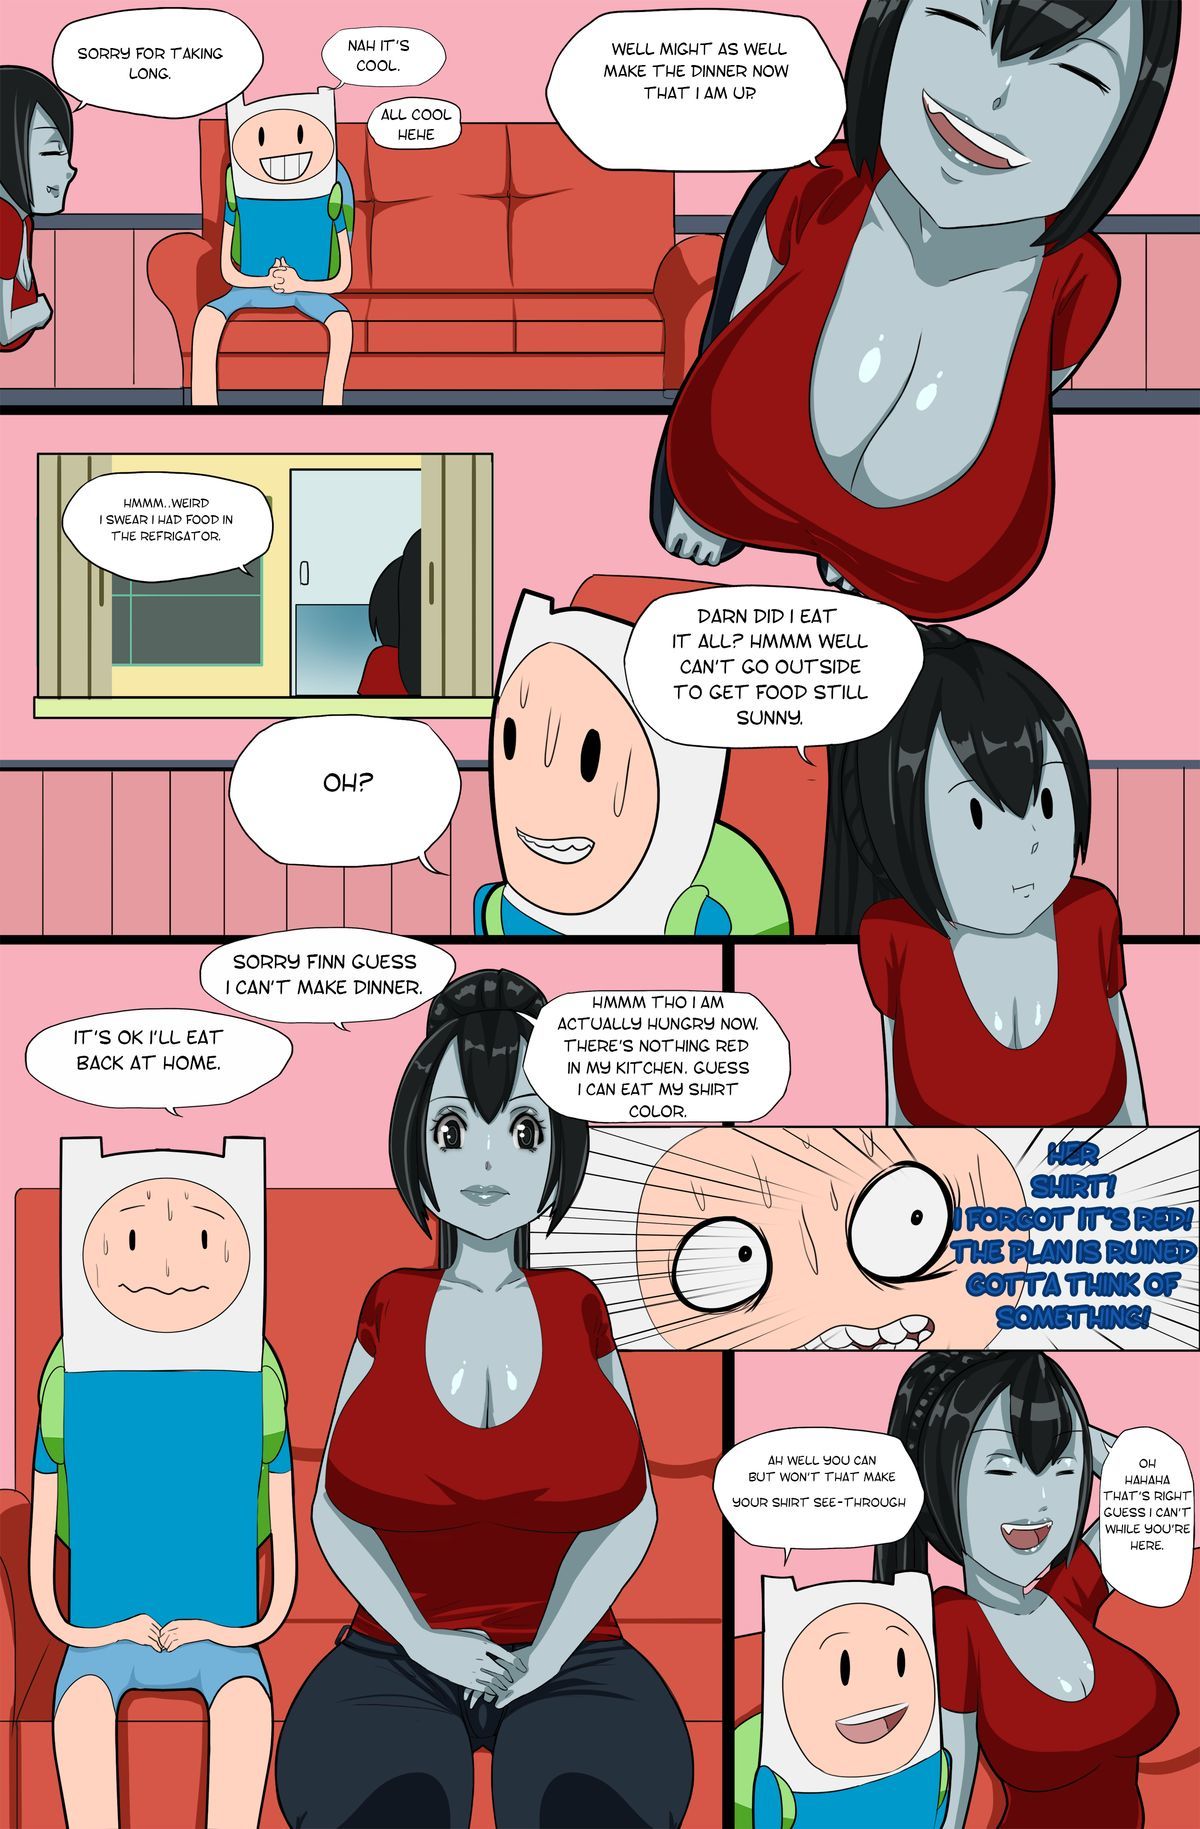 [Dipdoodle]_Adventure_Time_-_Desire_For_the_Color_Lust comix_59909.jpg